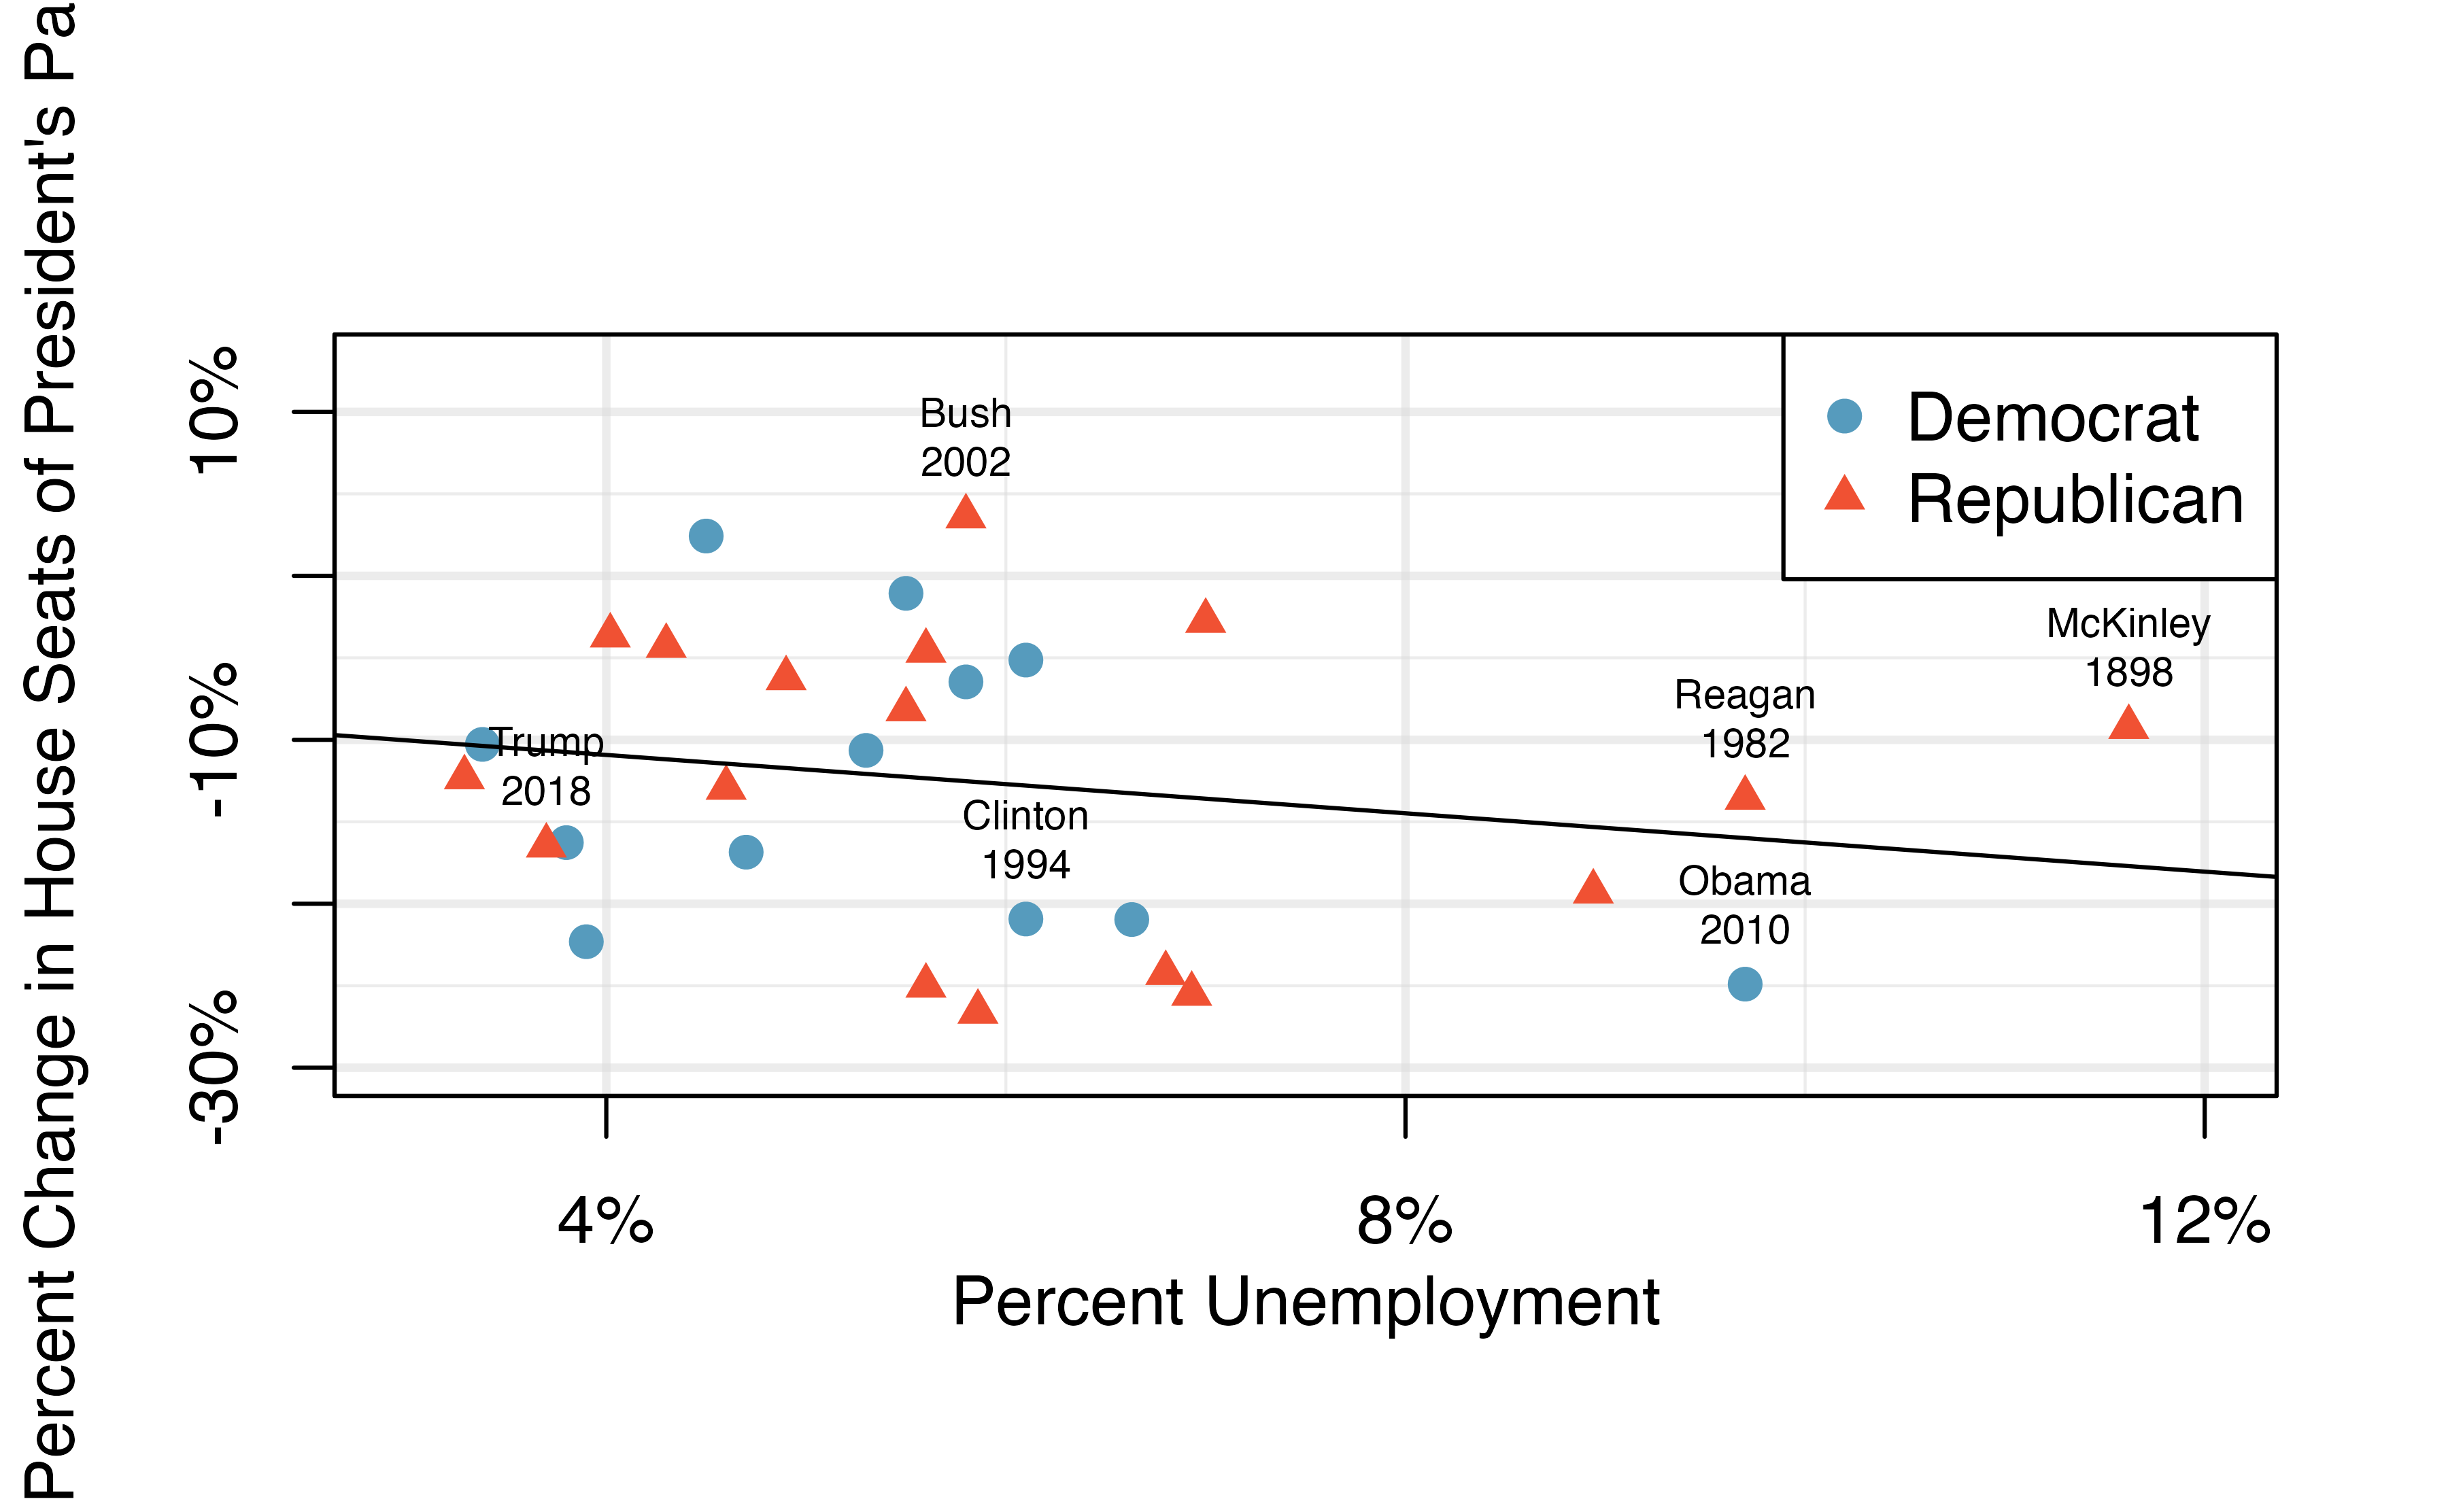 The percent change in House seats for the President's party in each midterm election from 1898 to 2010 plotted against the unemployment rate. The two points for the Great Depression have been removed, and a least squares regression line has been fit to the data.